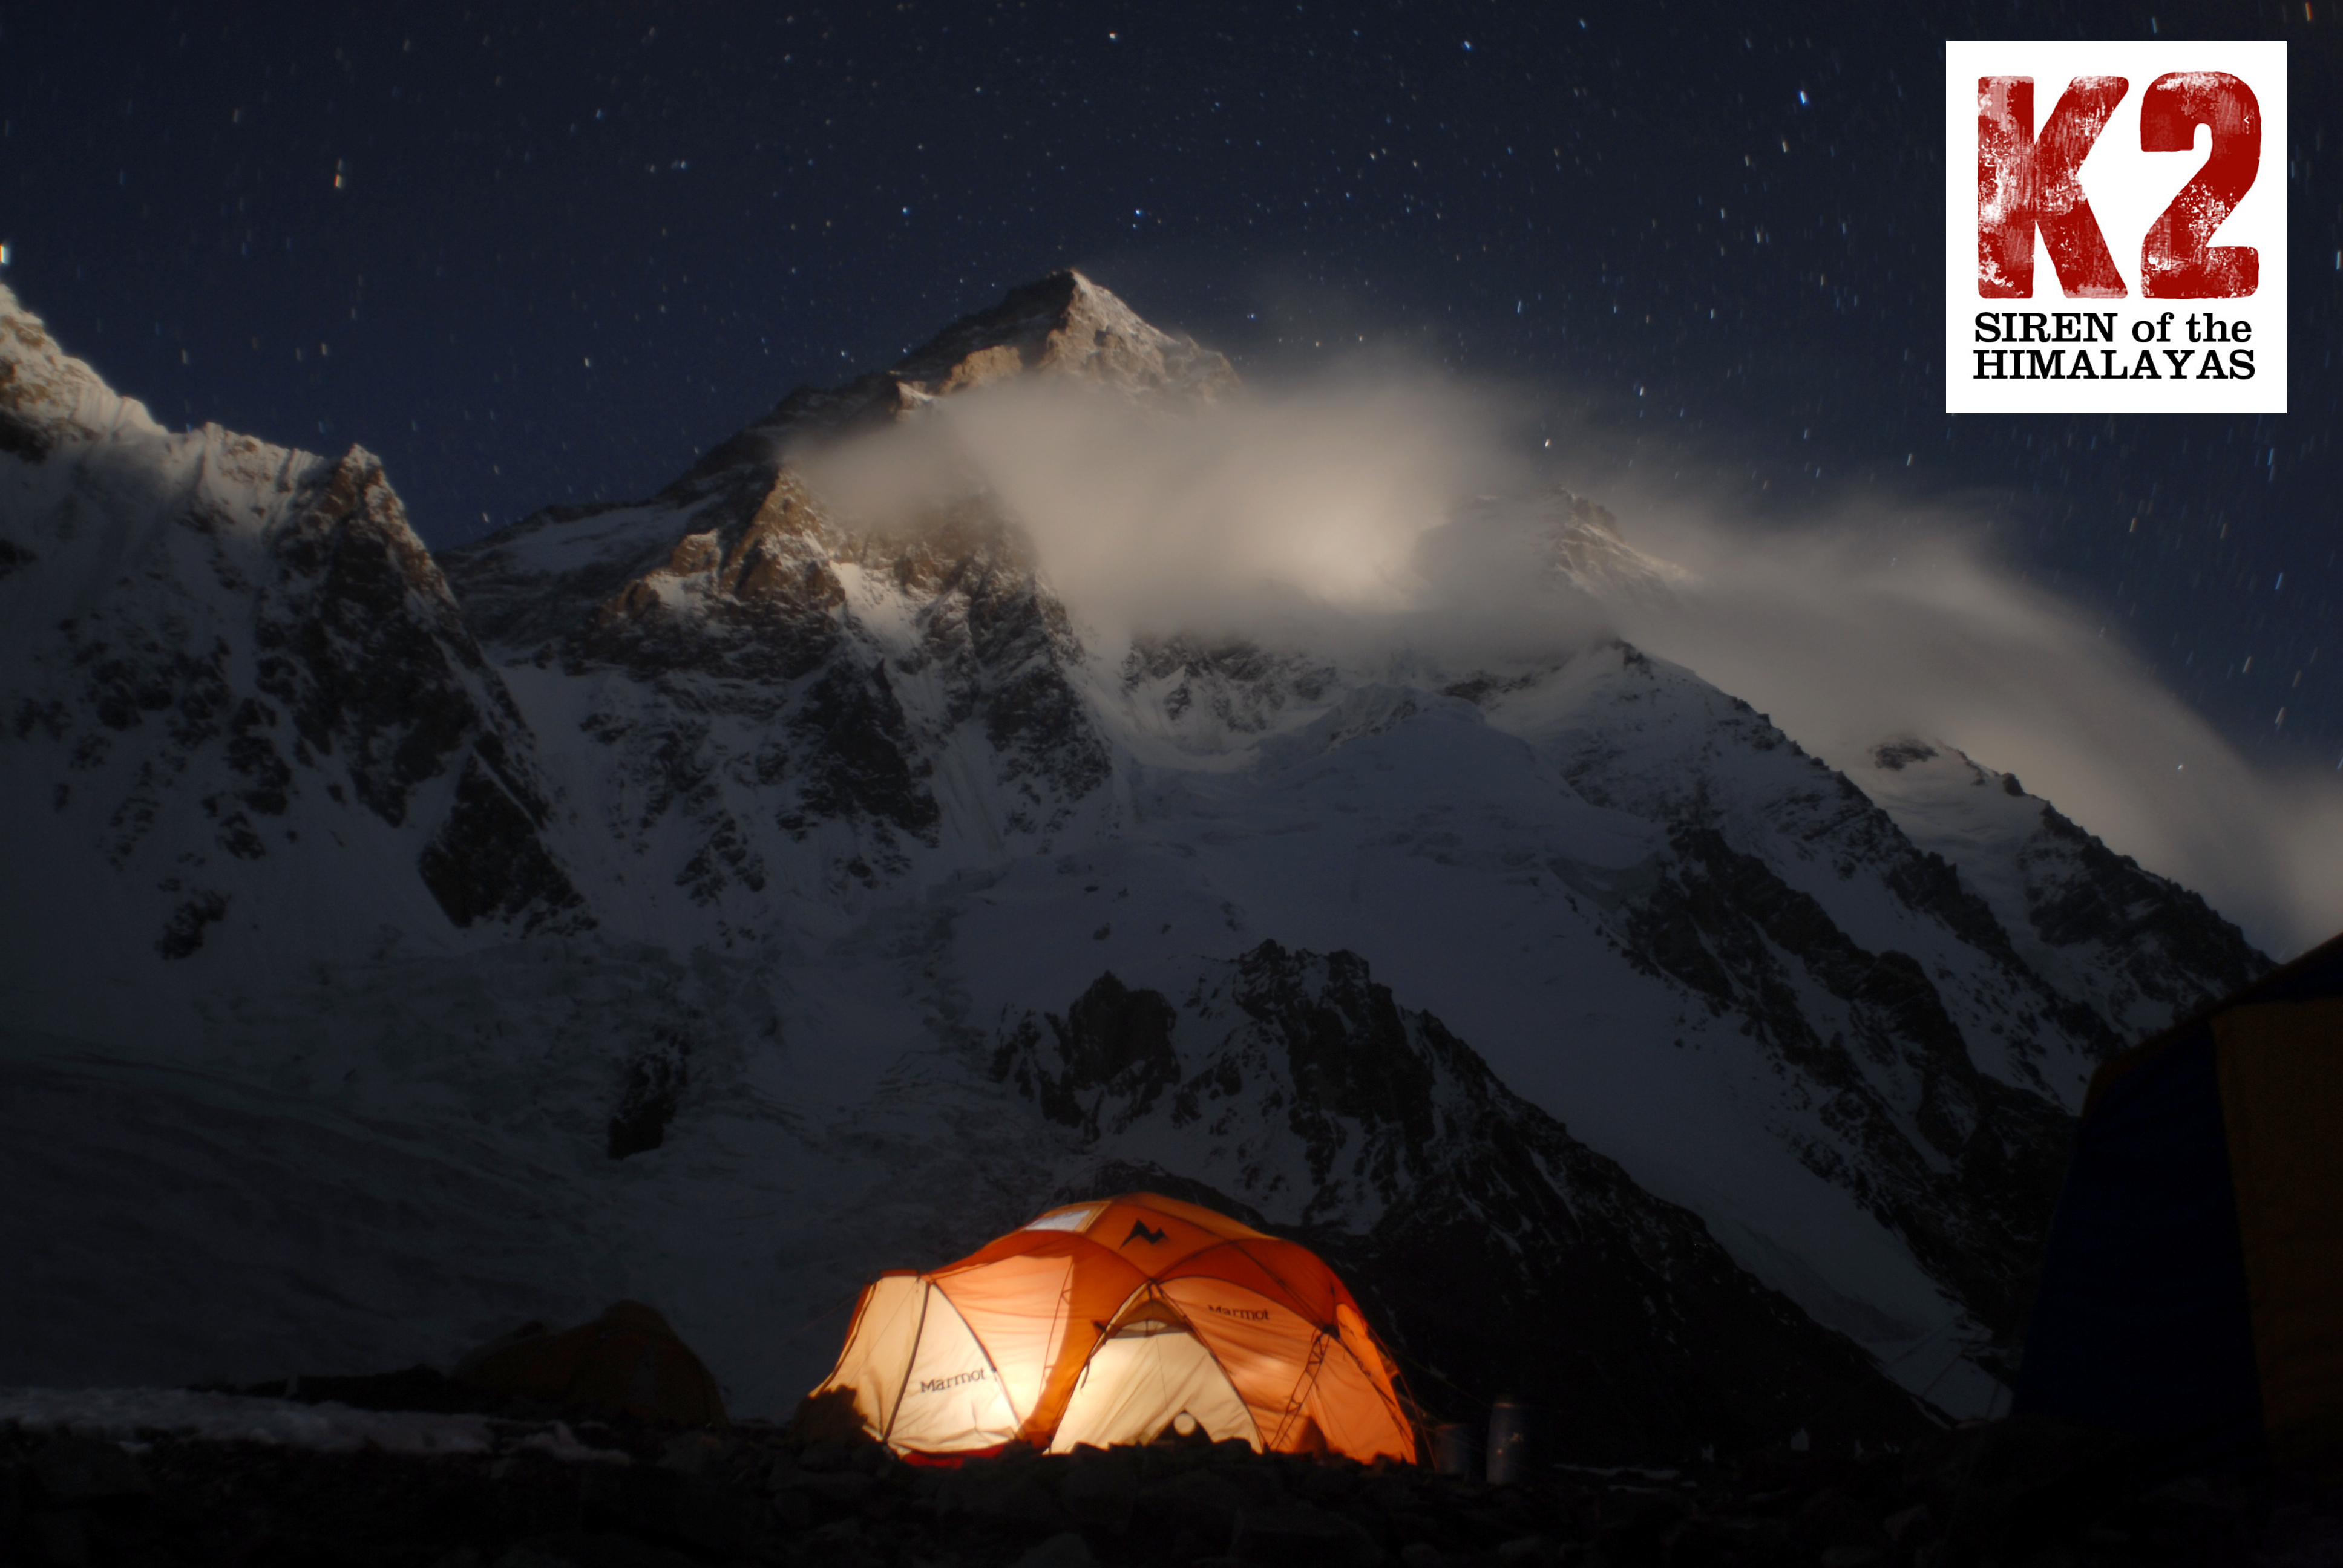 Camping below the summit of K2